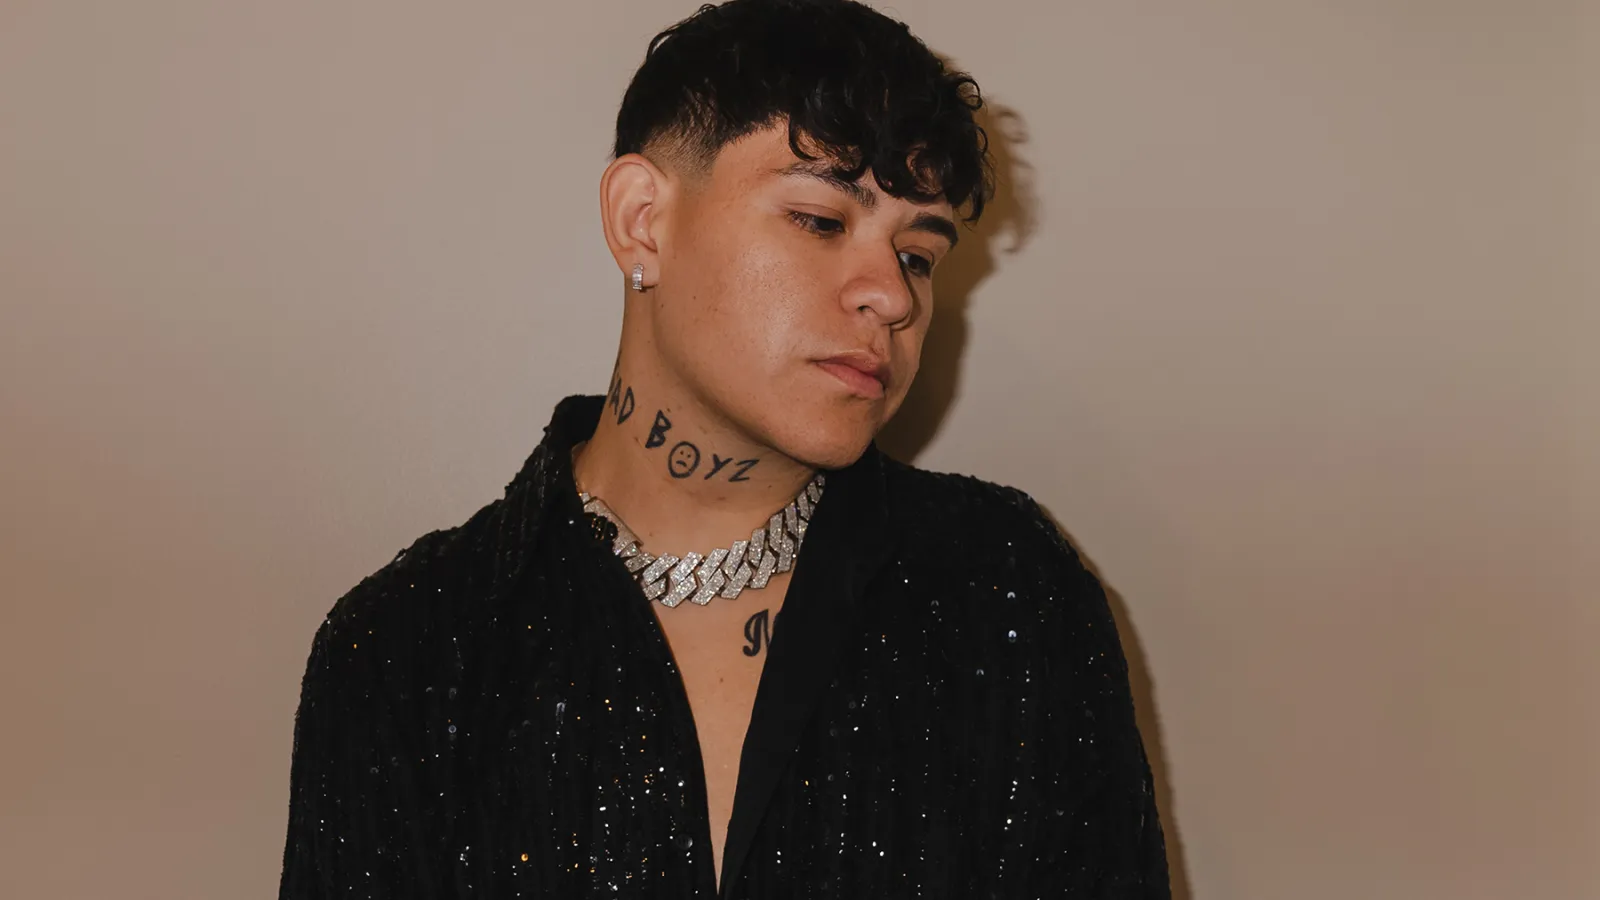 Junior H Wiki, Age, Ethnicity, Parents & Siblings, Girlfriend, Height & Weight, Career, Net Worth